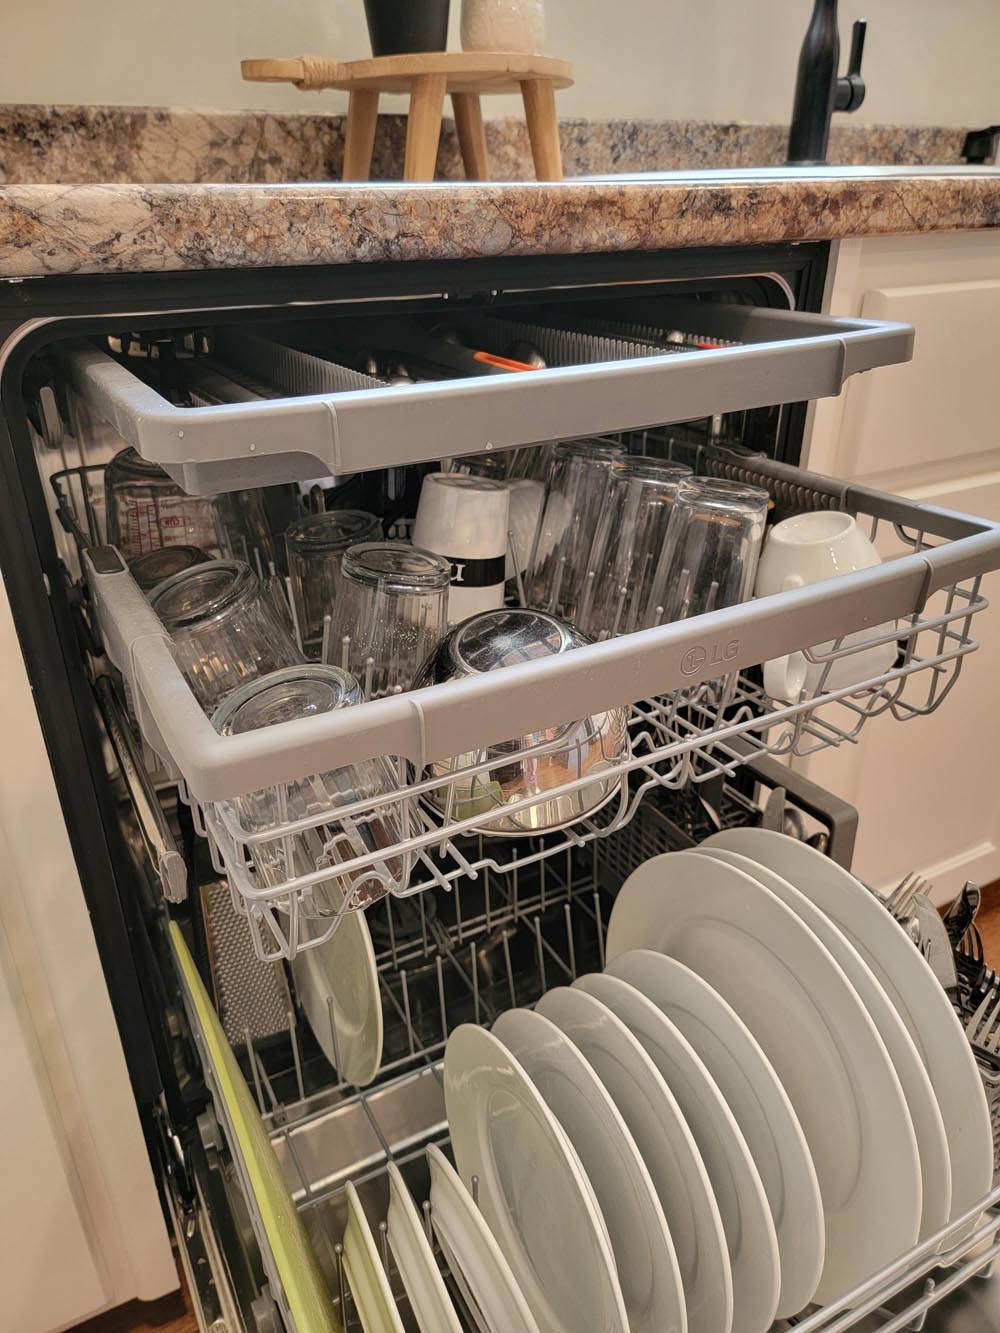 A new dishwasher filled with dishes.